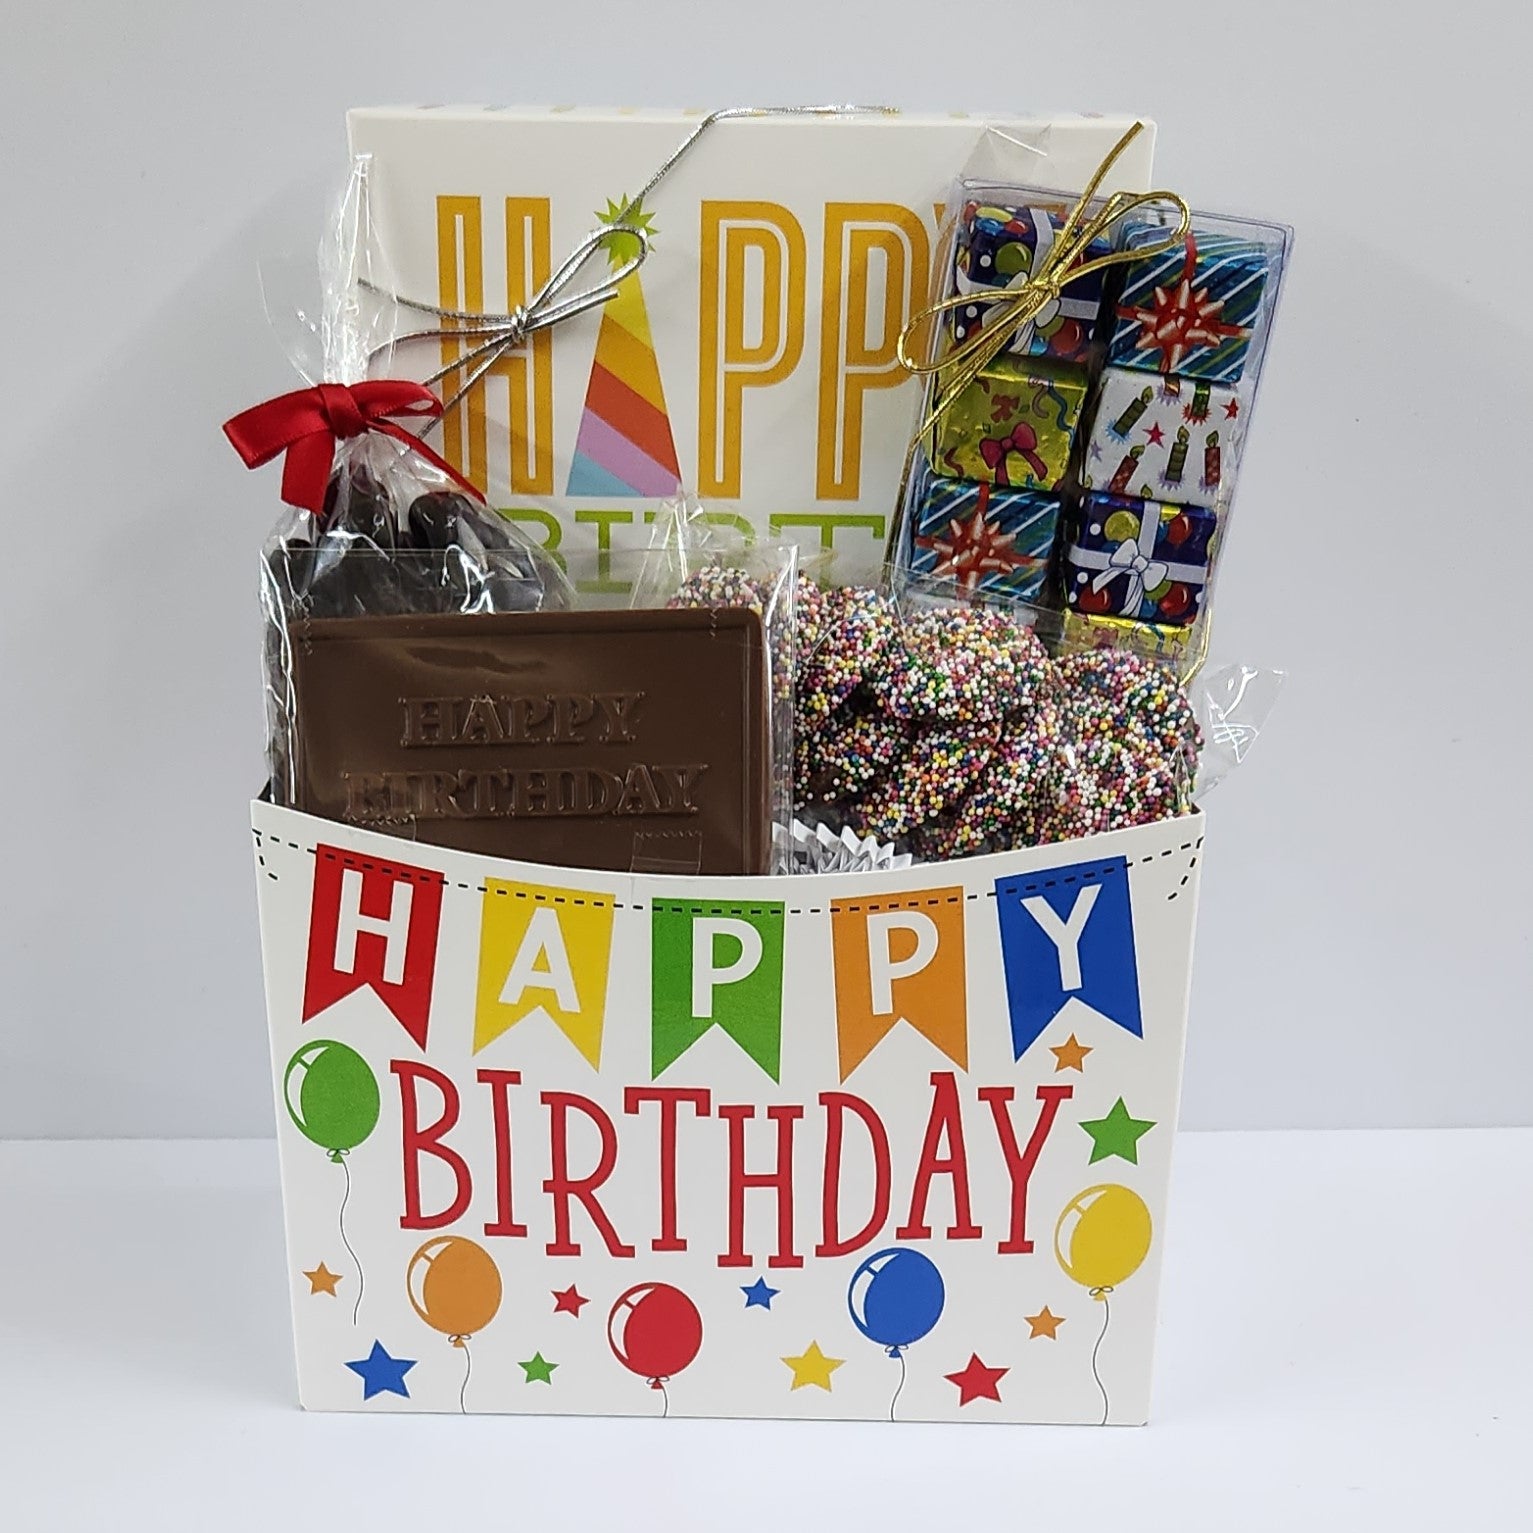 Happy Birthday Gift Basket with balloon images includes foiled milk chocolate presents, milk chocolate nonpareils, dark chocolate-covered cranberries, milk chocolate birthday card and a 16-piece cream, caramels, meltaways, and truffle assortment